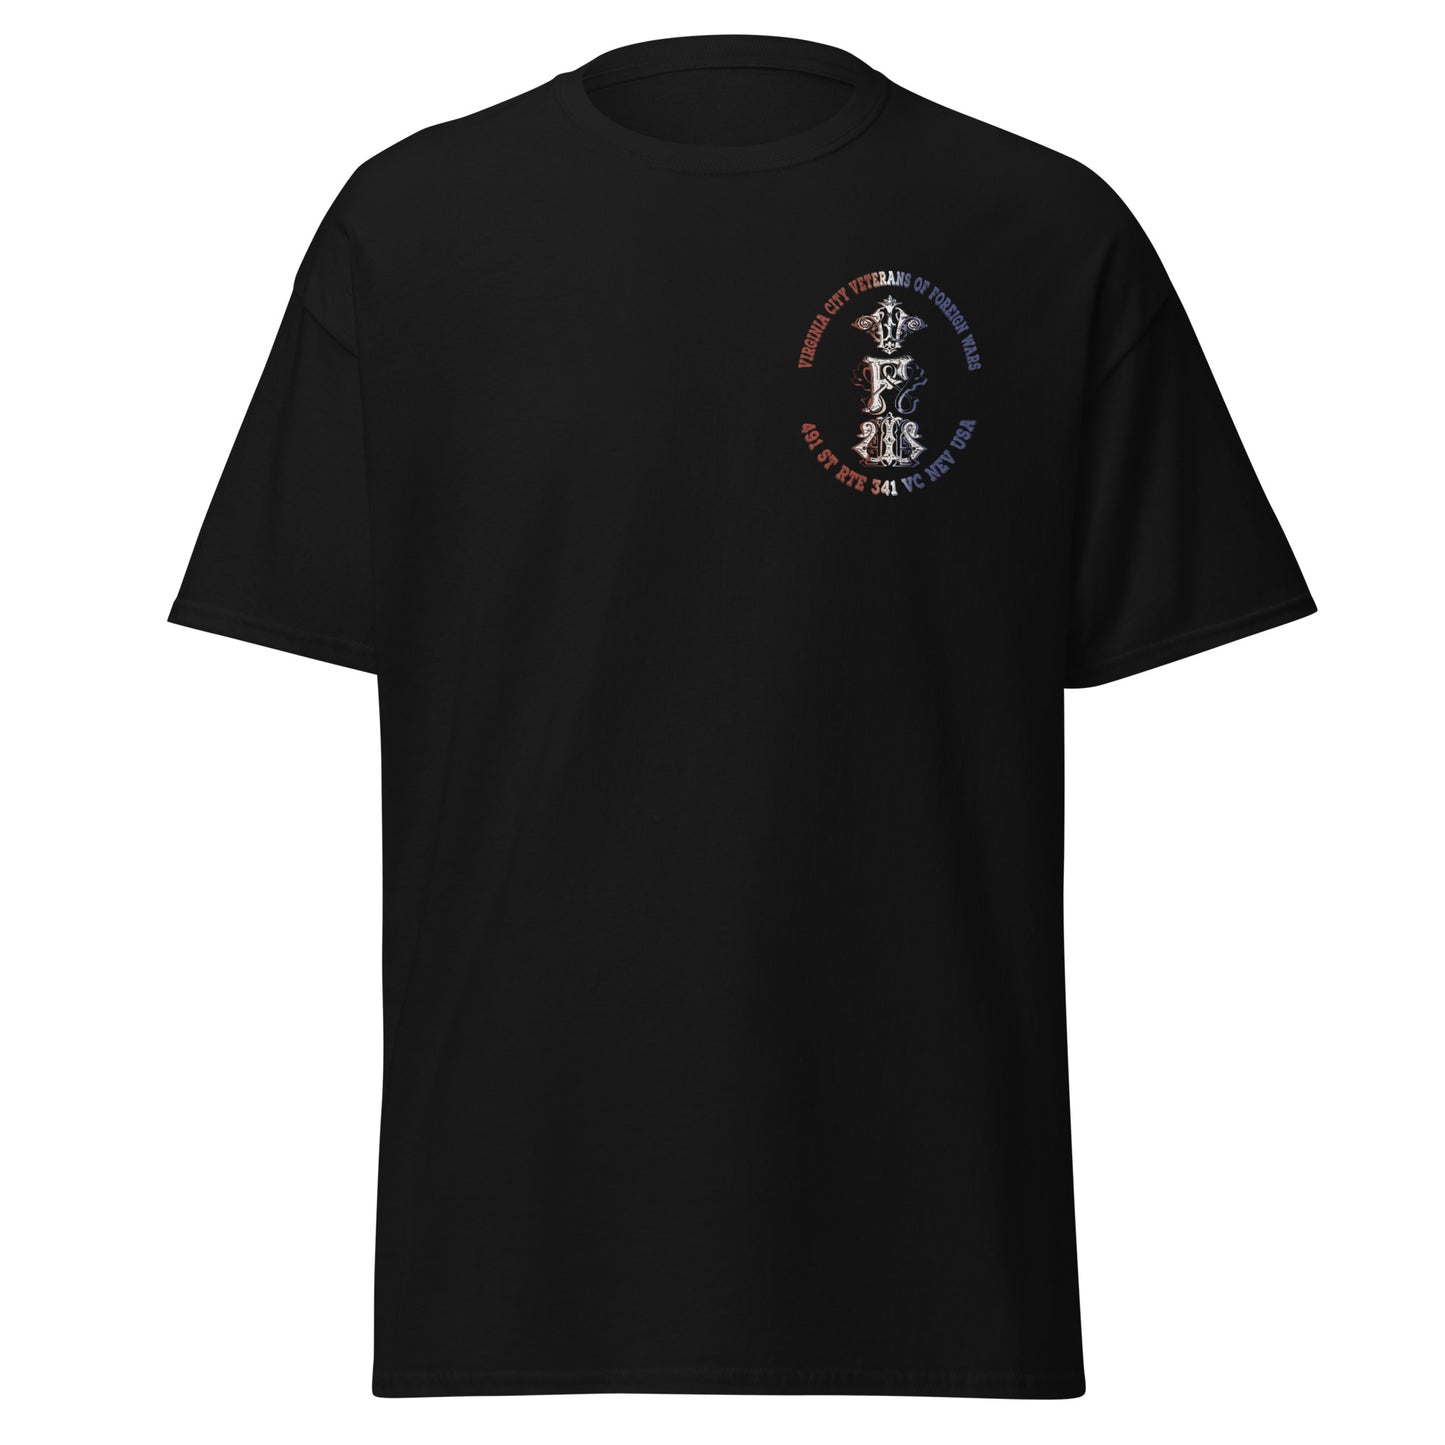 Men's classic tee for the VC VFW Men's T-Shirt Virginia City Motorcycle Company Apparel in Nevada USA